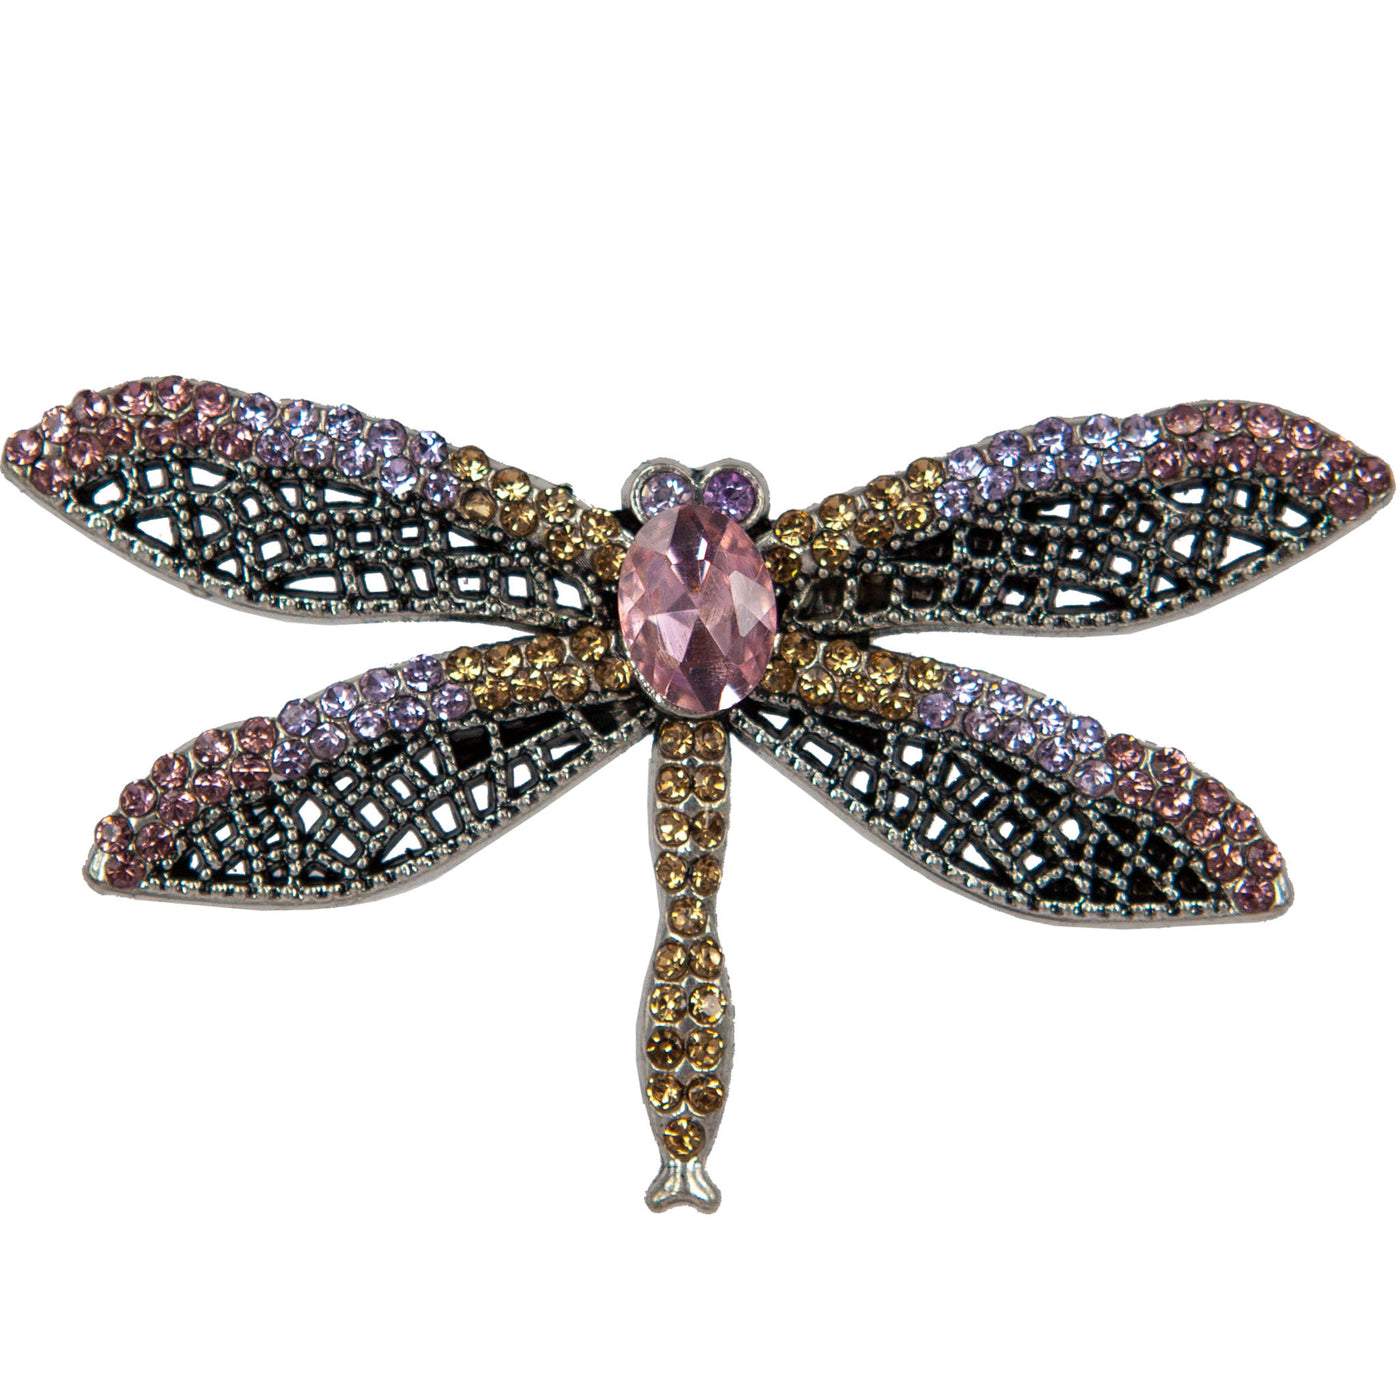 Brooch into a dragonfly